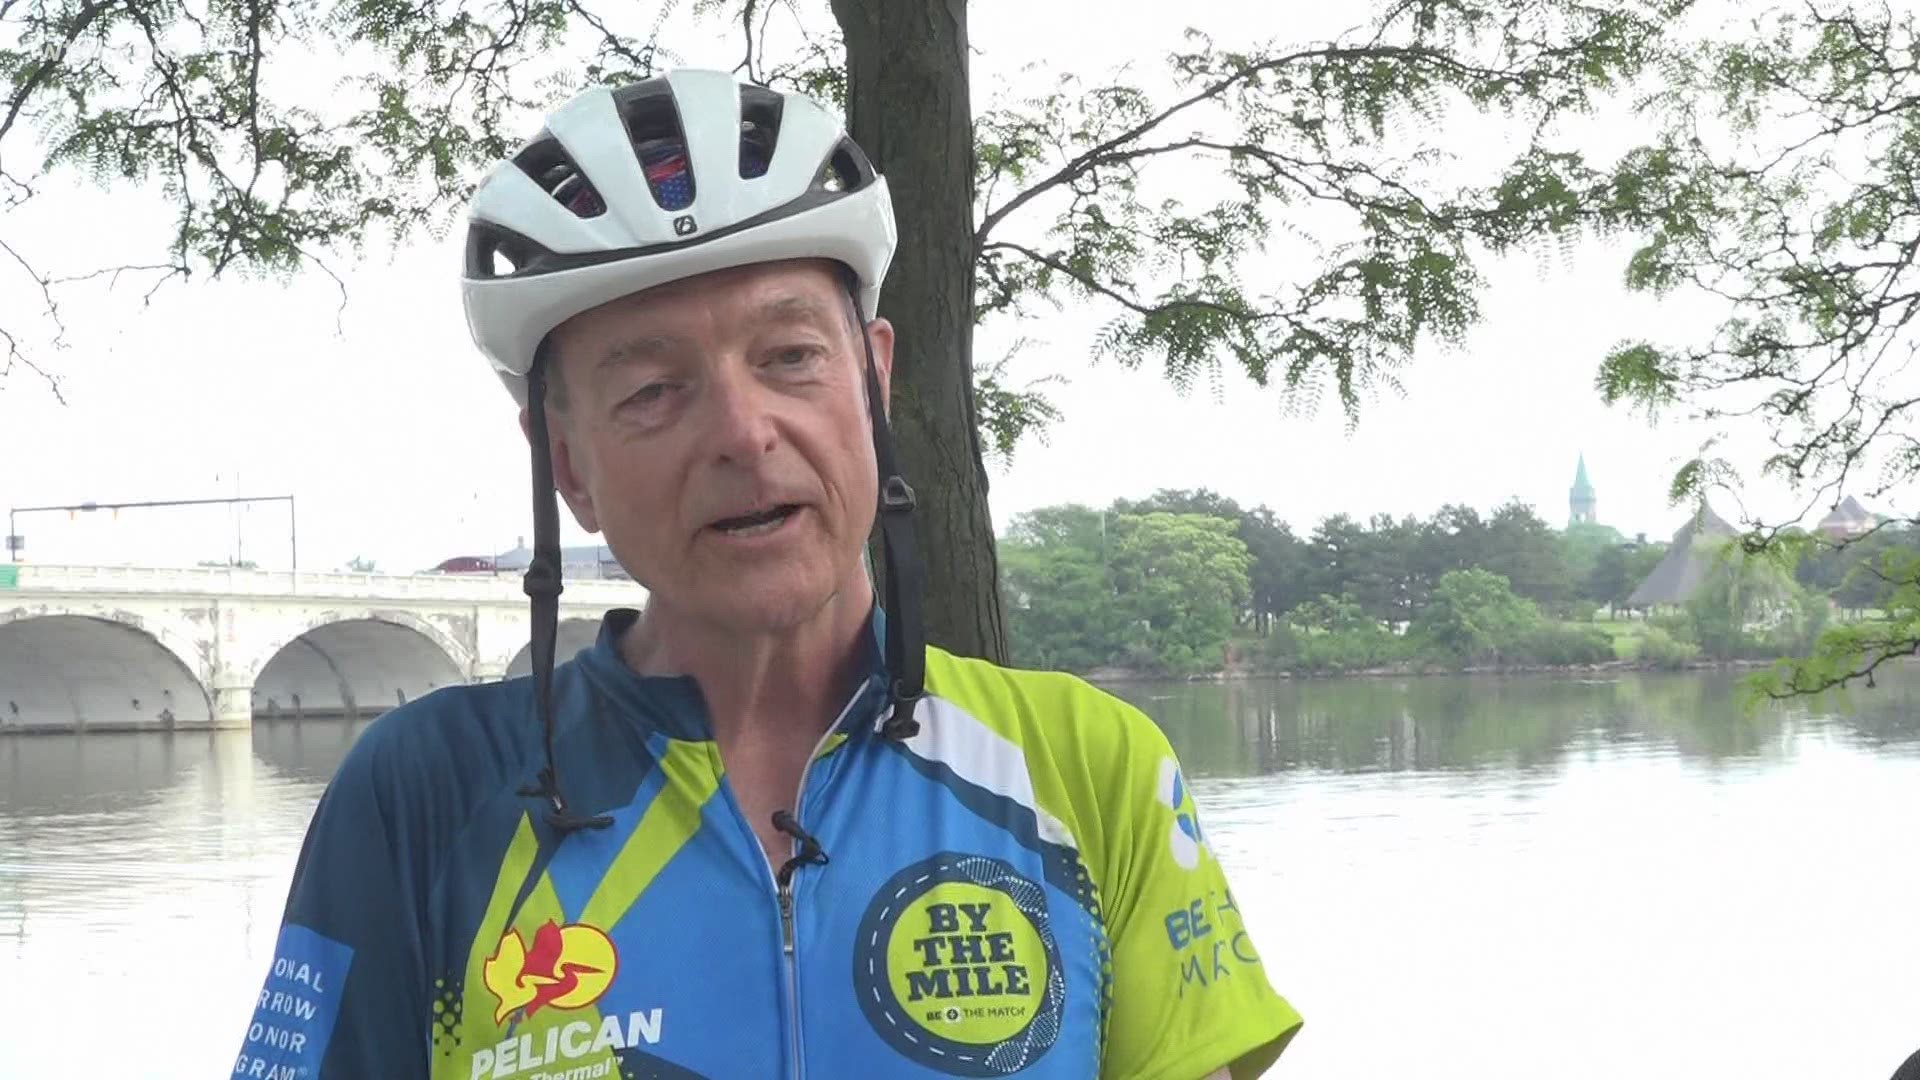 64-year-old Bob Falkenberg, aims to bike 3,500 miles in a hope to raise funds and have donors sign up with Be The Match.